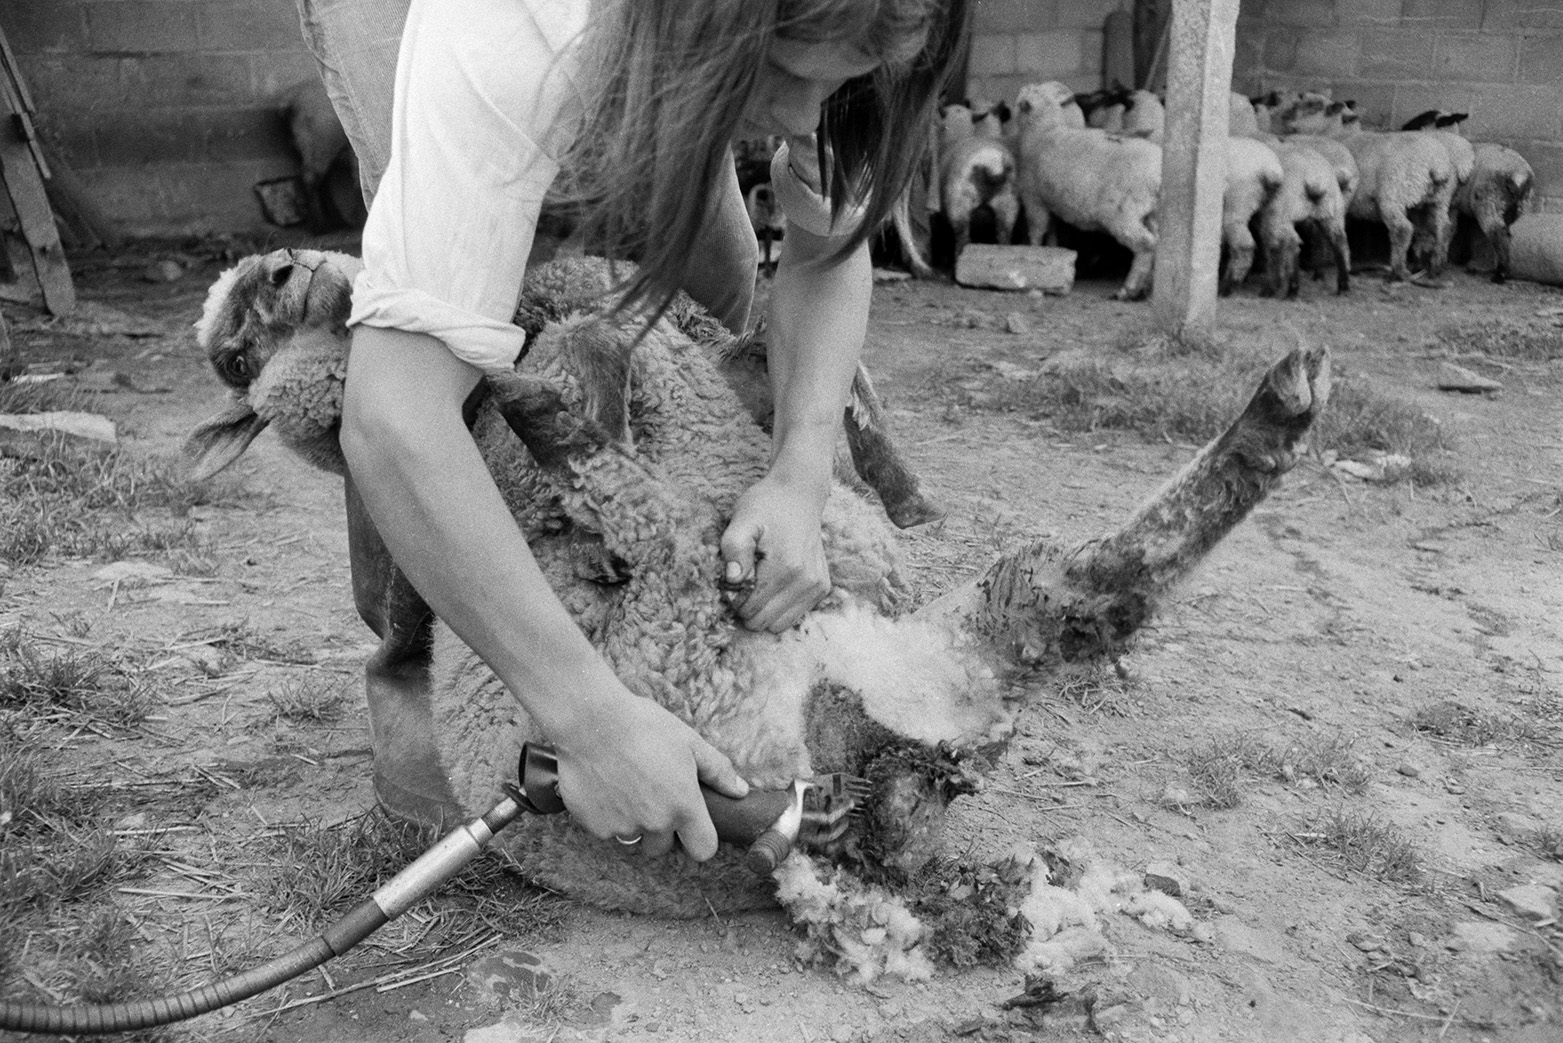 Derek Bright docking sheep by clearing grass and matted wool from their bottoms using a shearing machine, in the farmyard at Mill Road Farm, Beaford. Other sheep can be seen in the background. The farm was also known as Jeffrys.